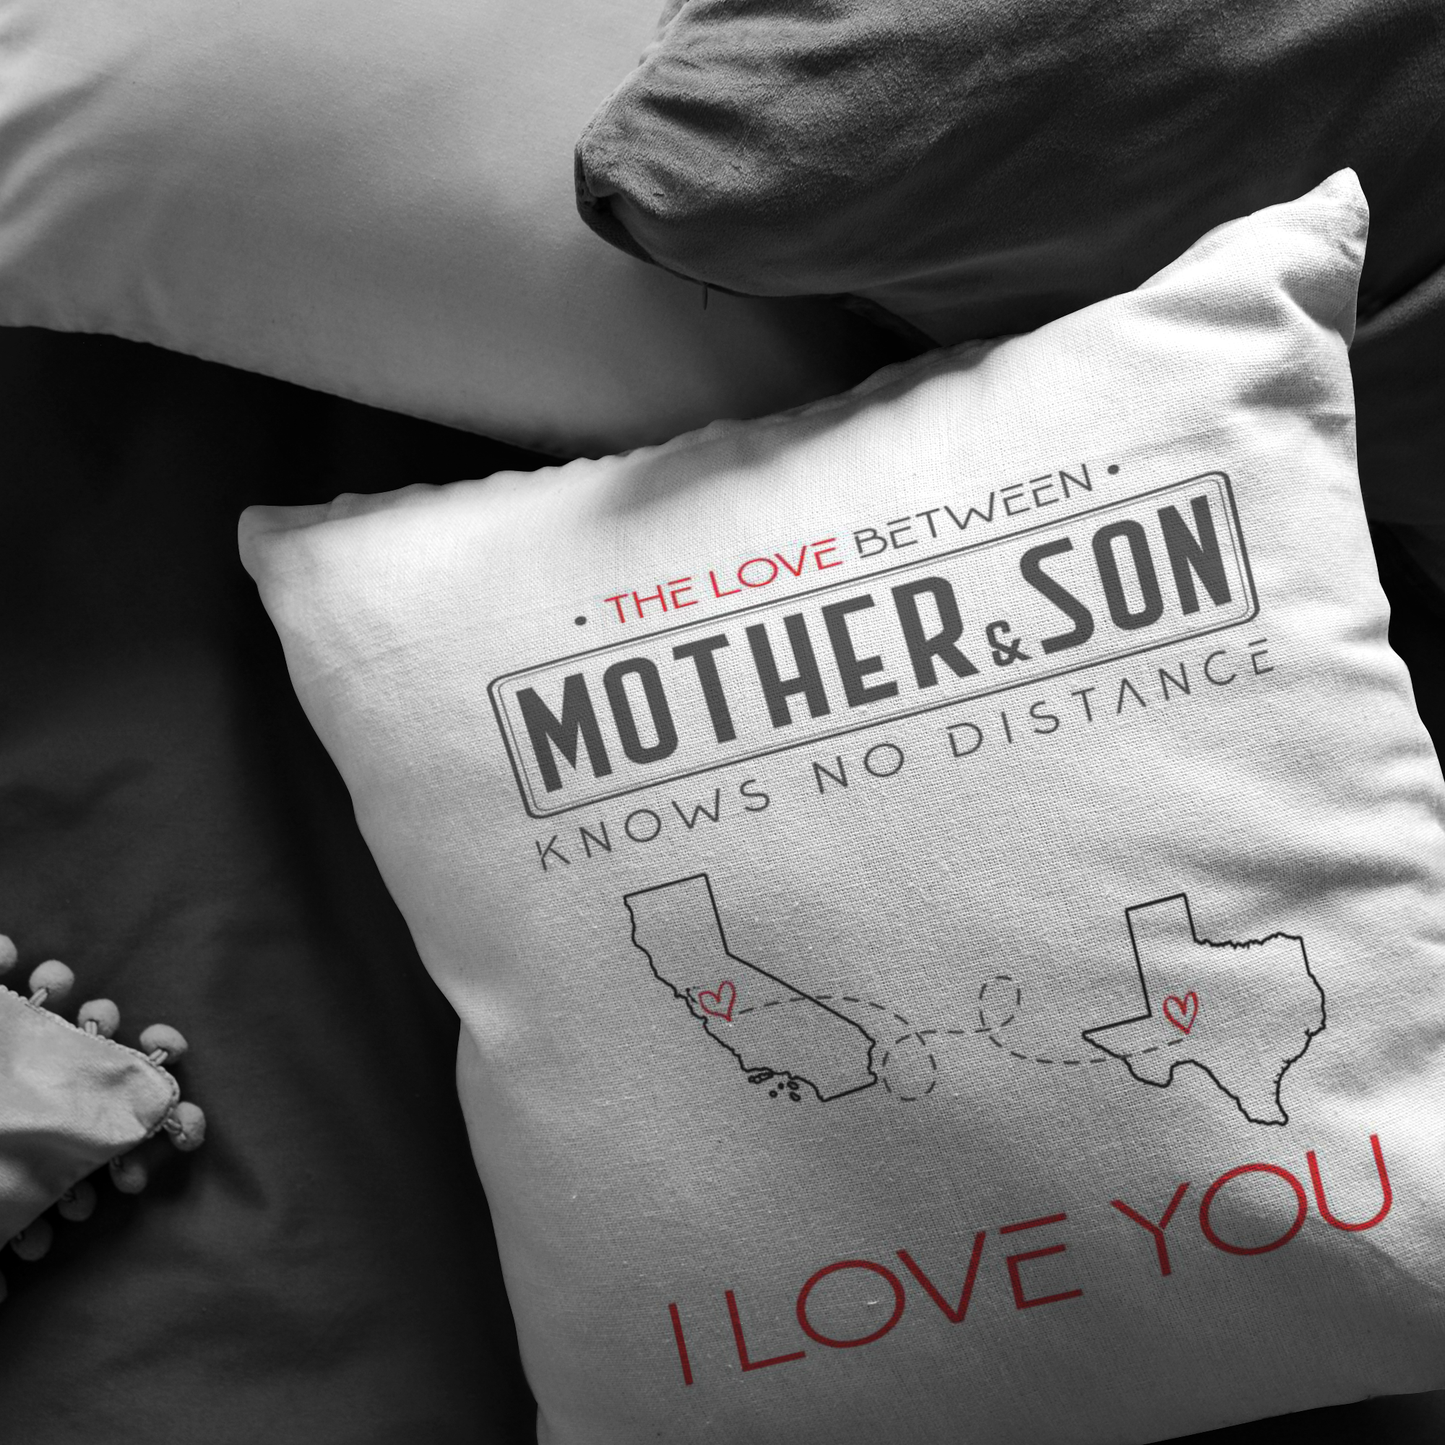 ND-pl20419401-sp-26367 - [ California | Texas | 1 ] (PI_ThrowPillowCovers) Mothers Day Gifts From Son - The Love Between Mother  Son